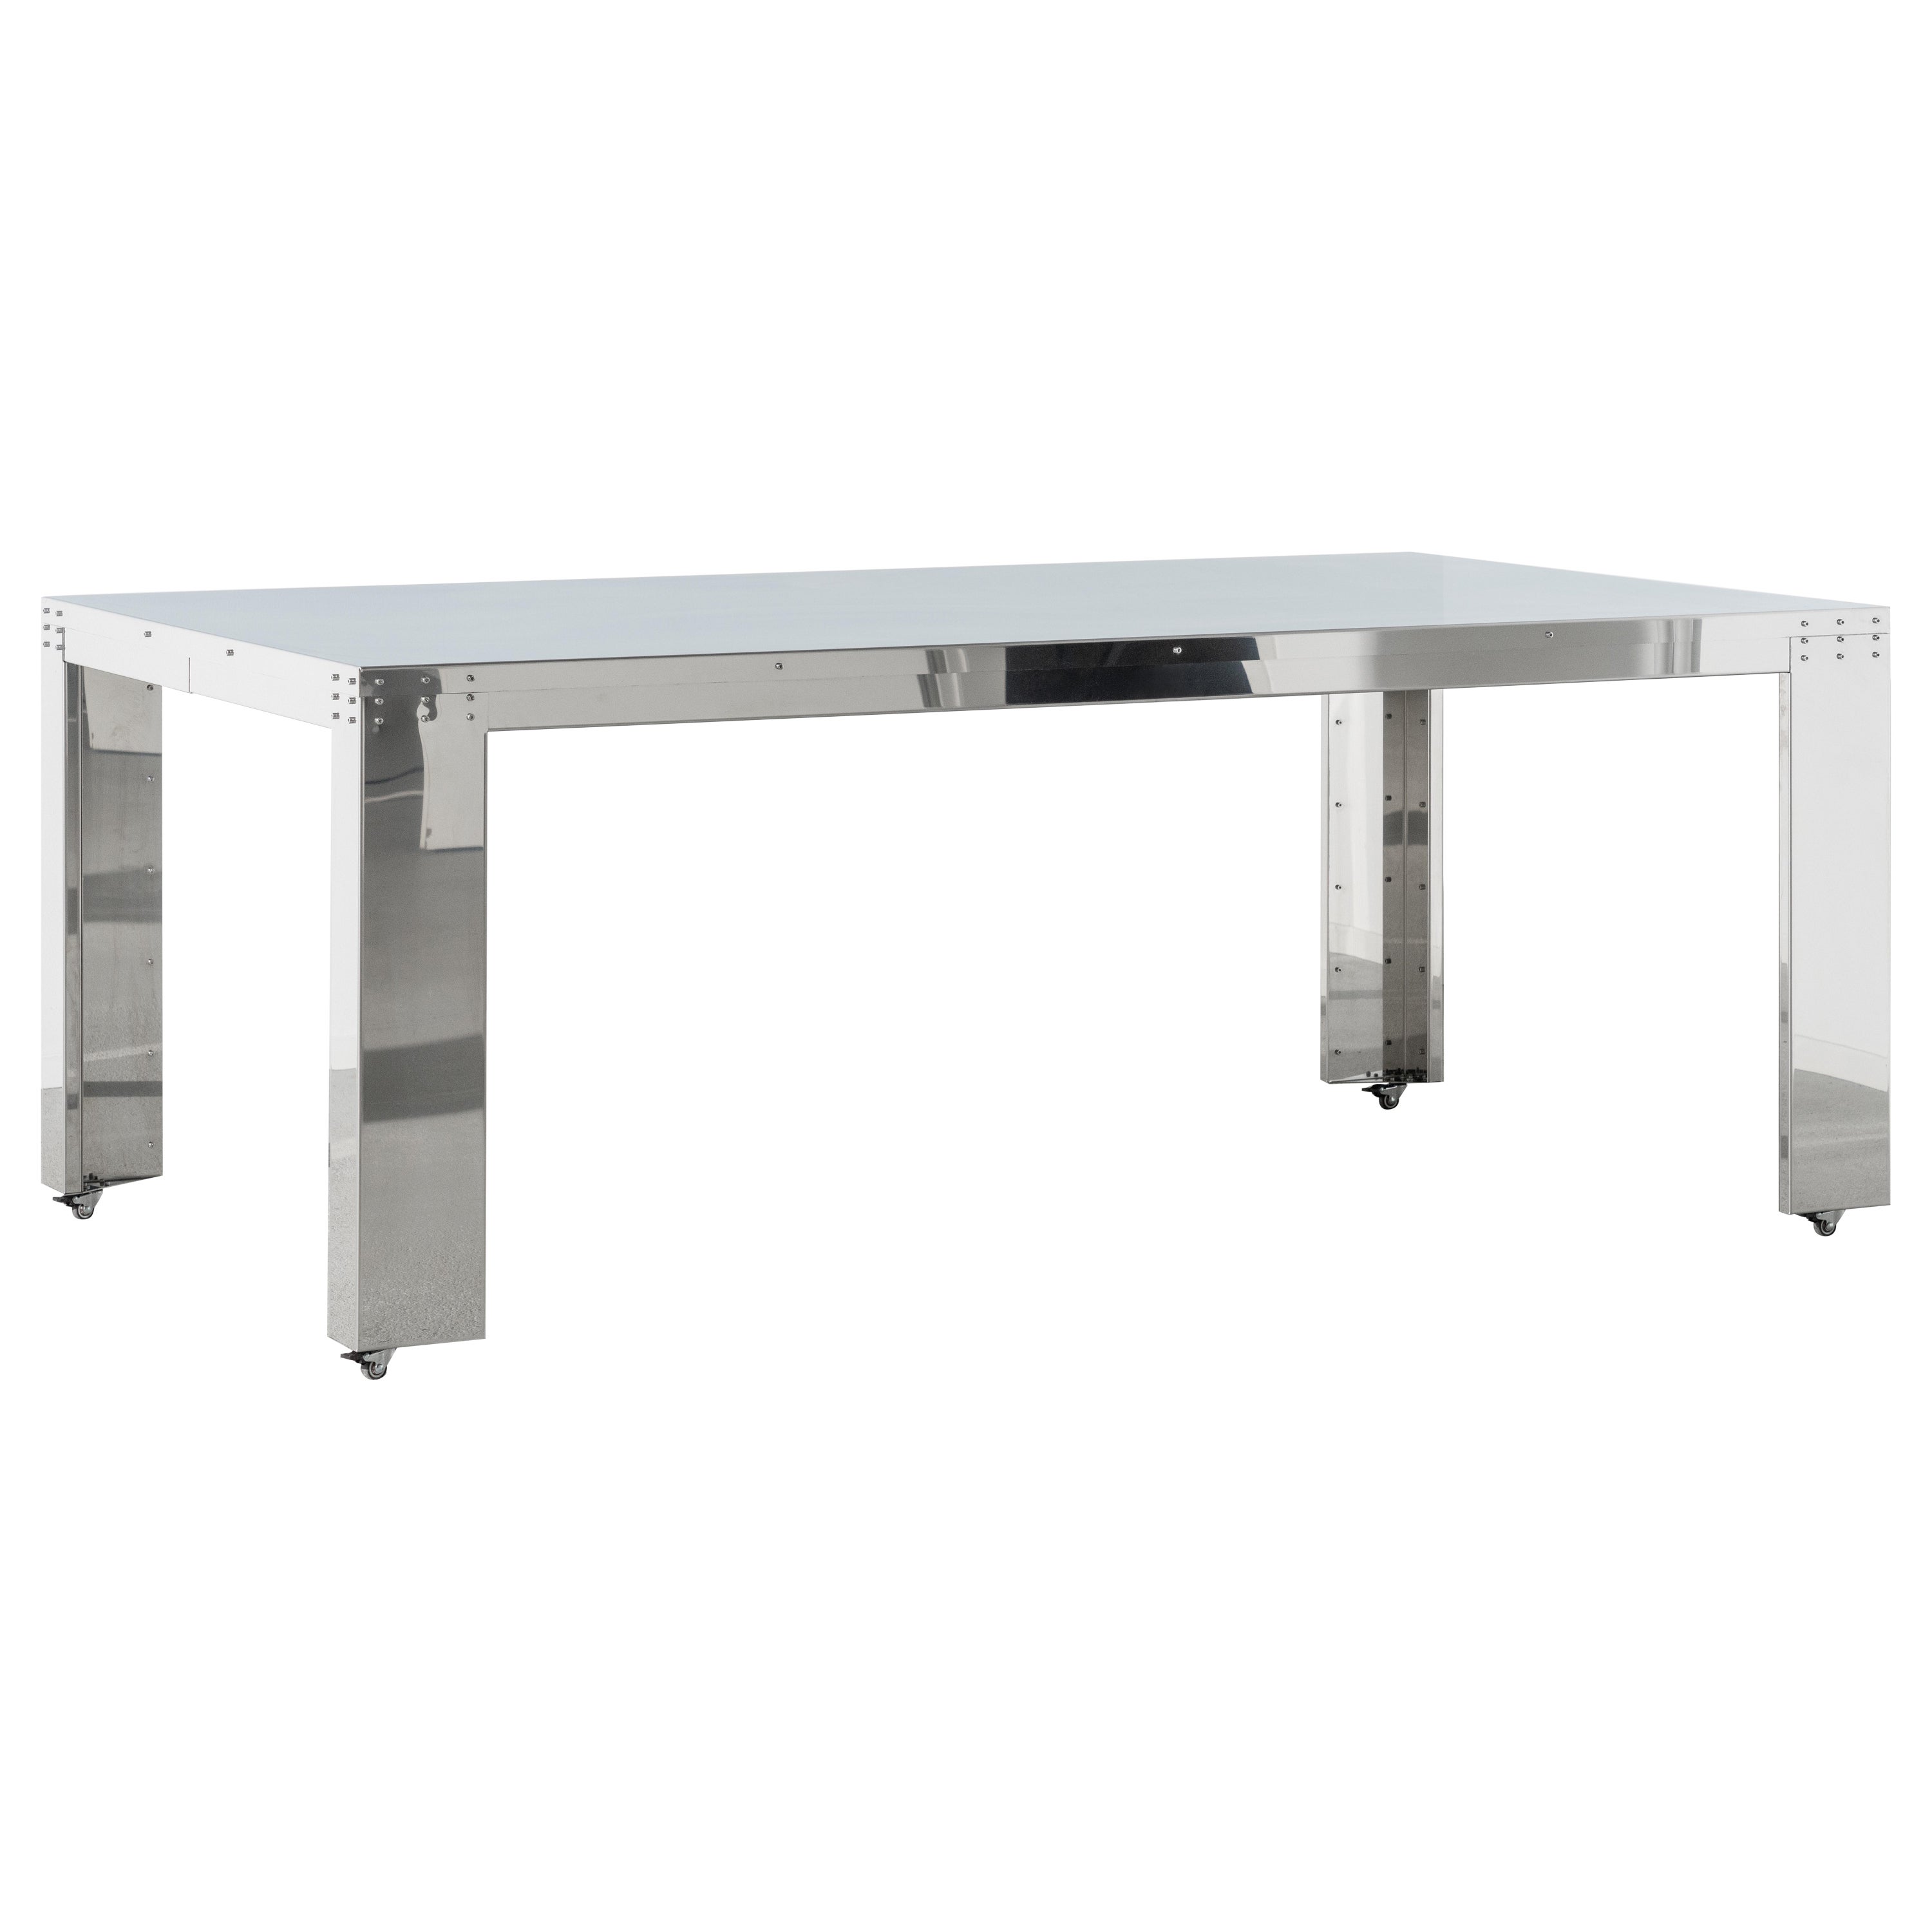 NMBC dining and work stainless steel table